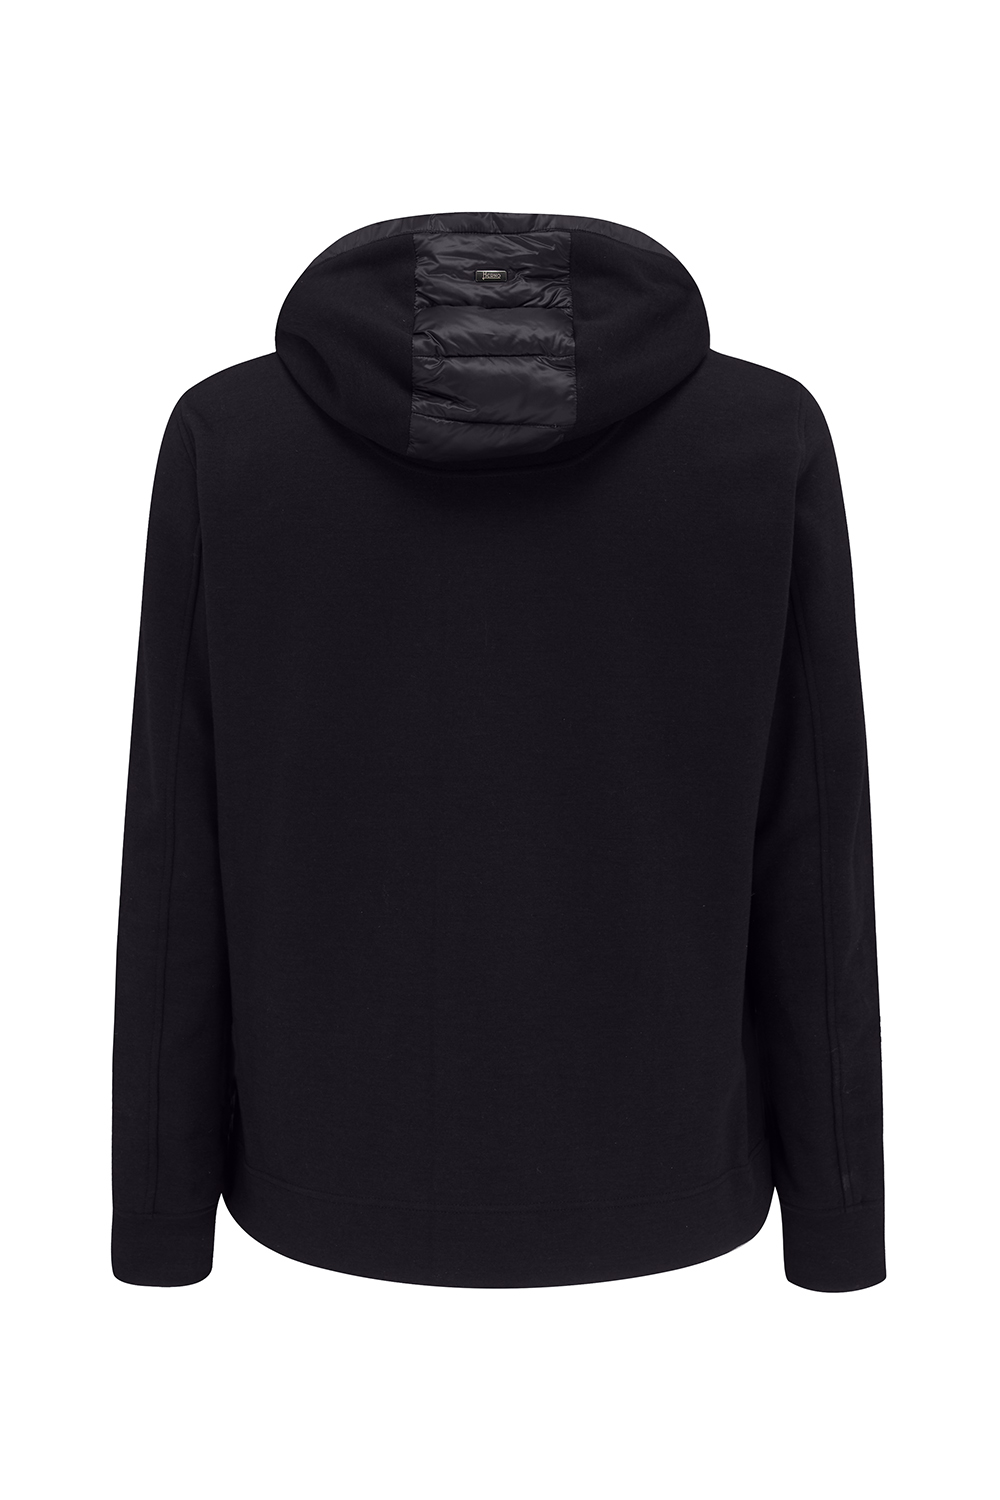 Herno Men’s Quilted Shell Cotton-blend Hoodie Black - New S22 ...